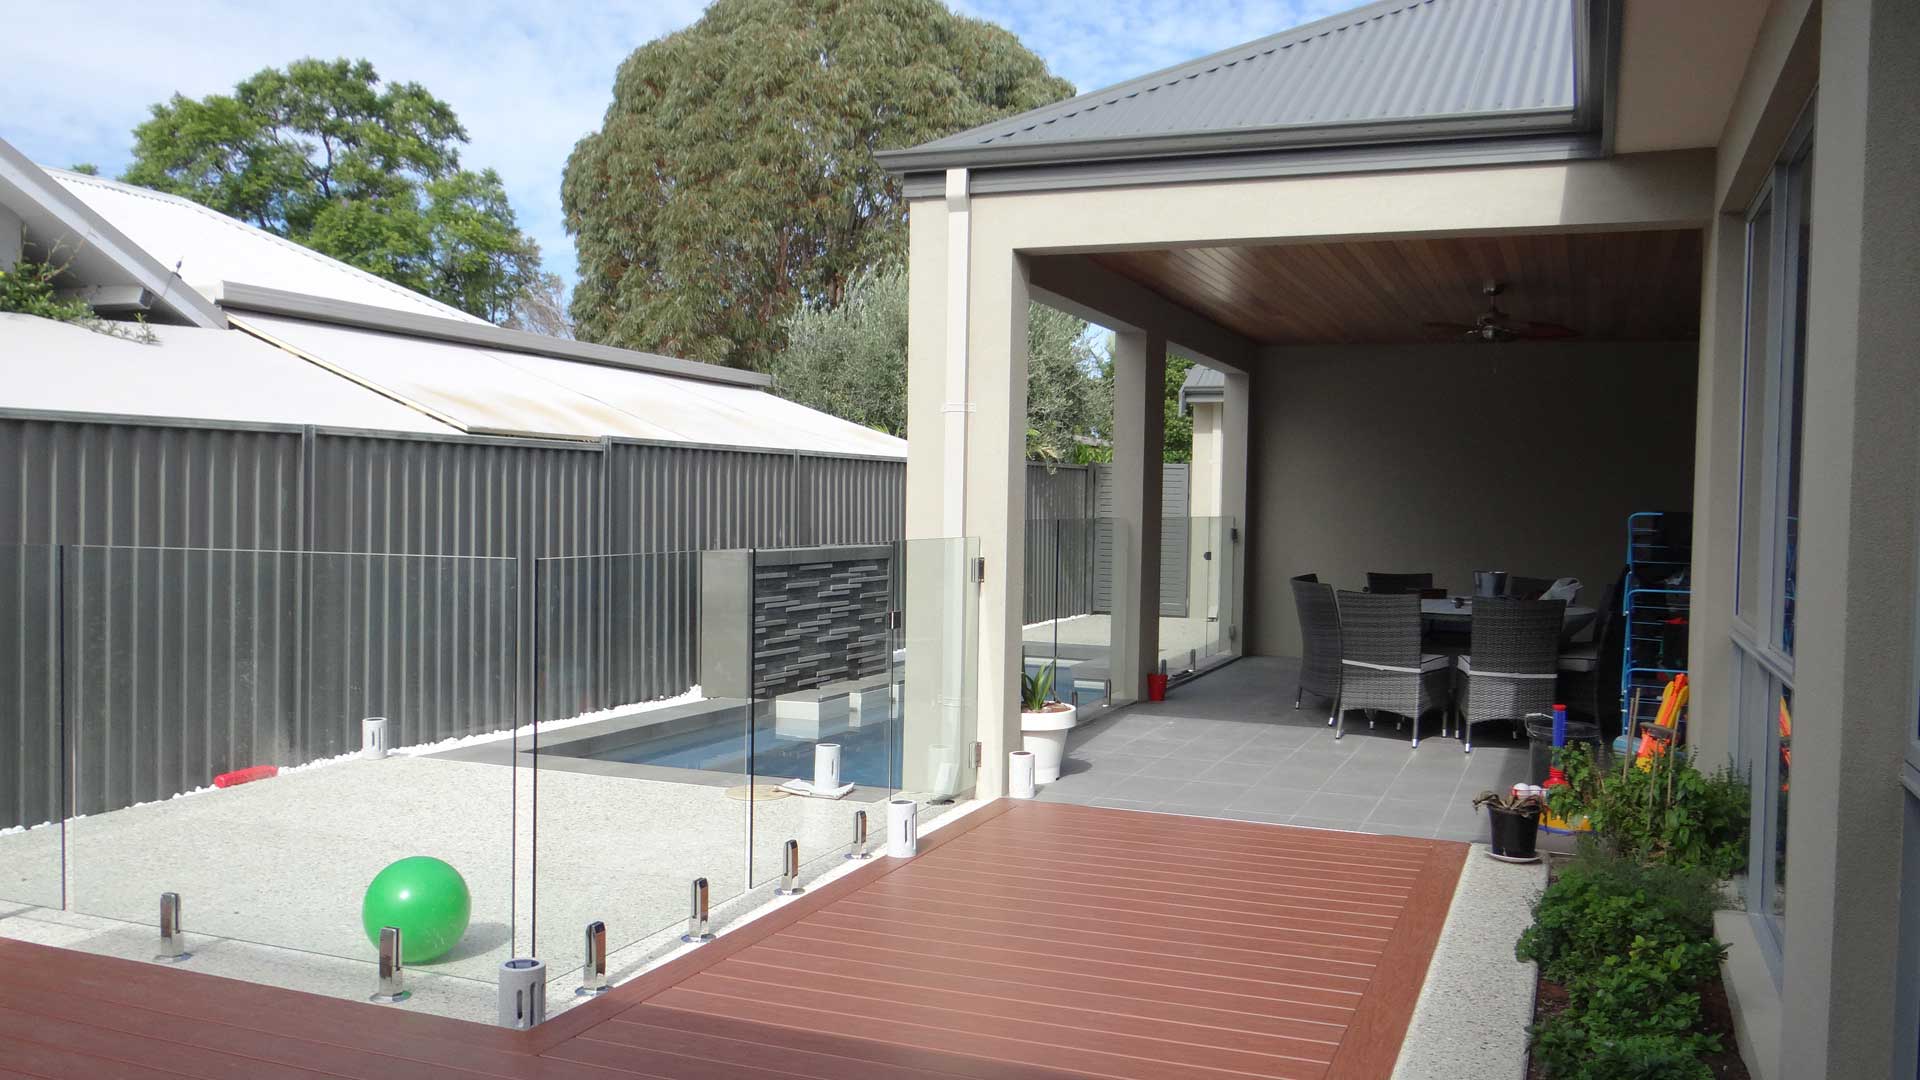 Frameless flass pool fencing around a pool area